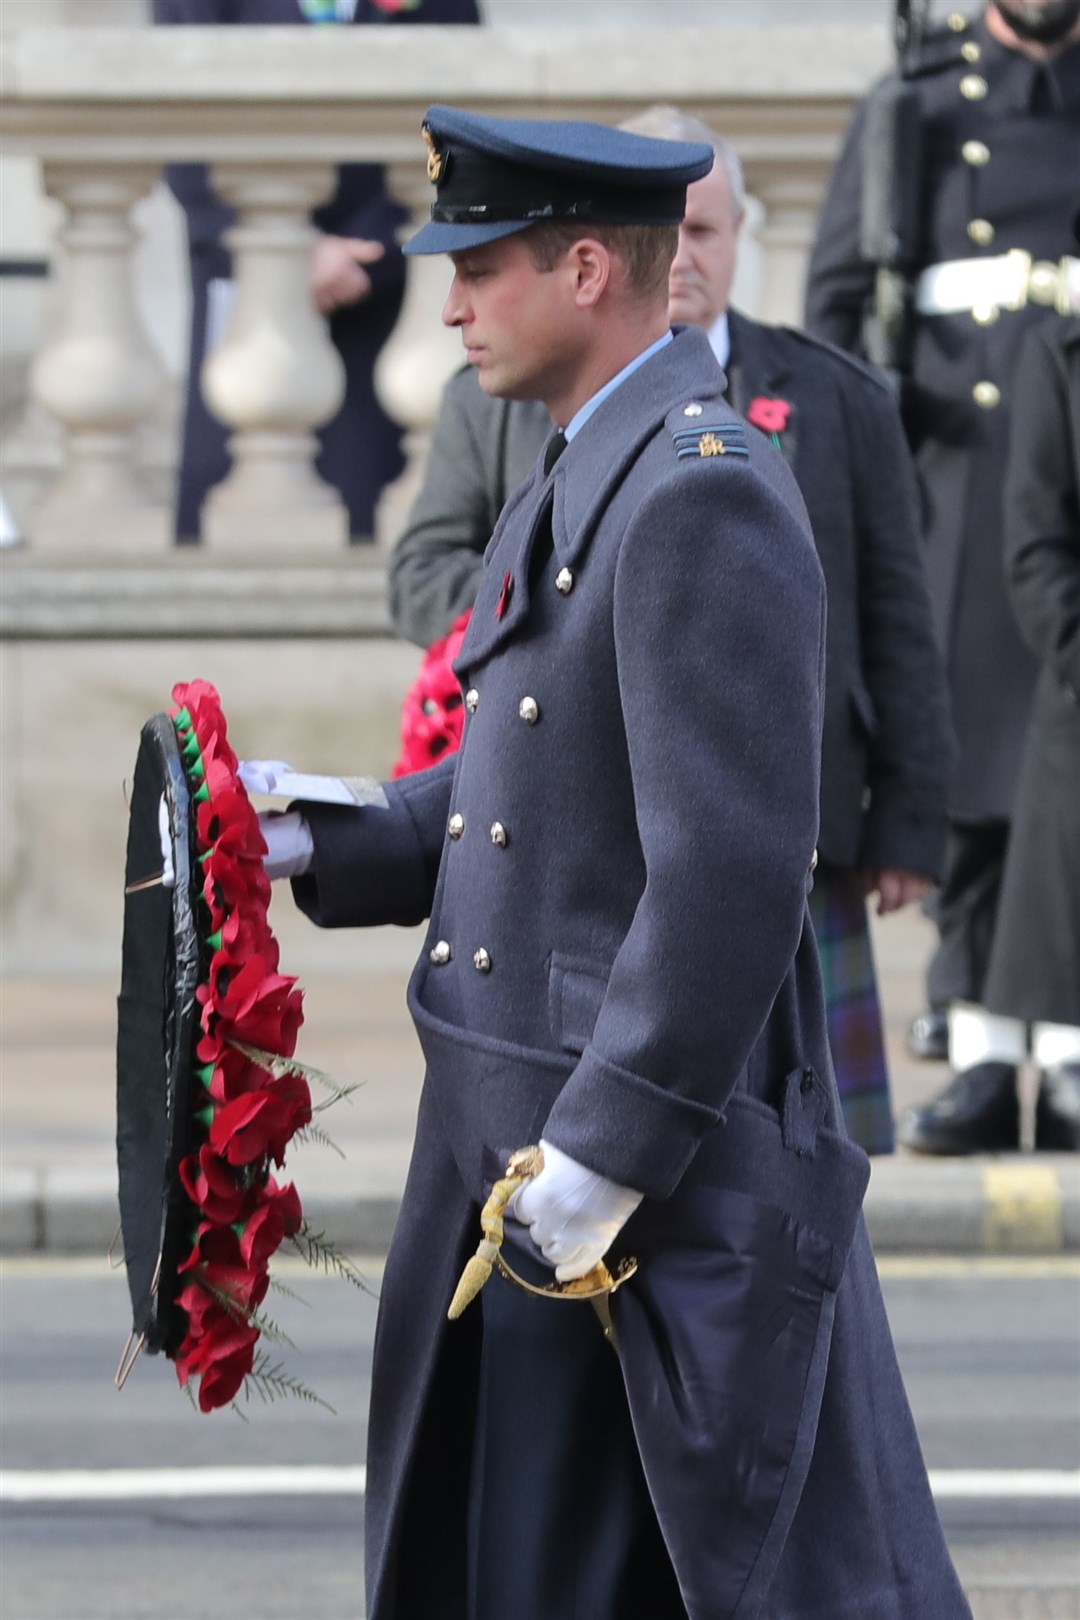 The Duke of Cambridge pays his respects (Aaron Chown/PA)